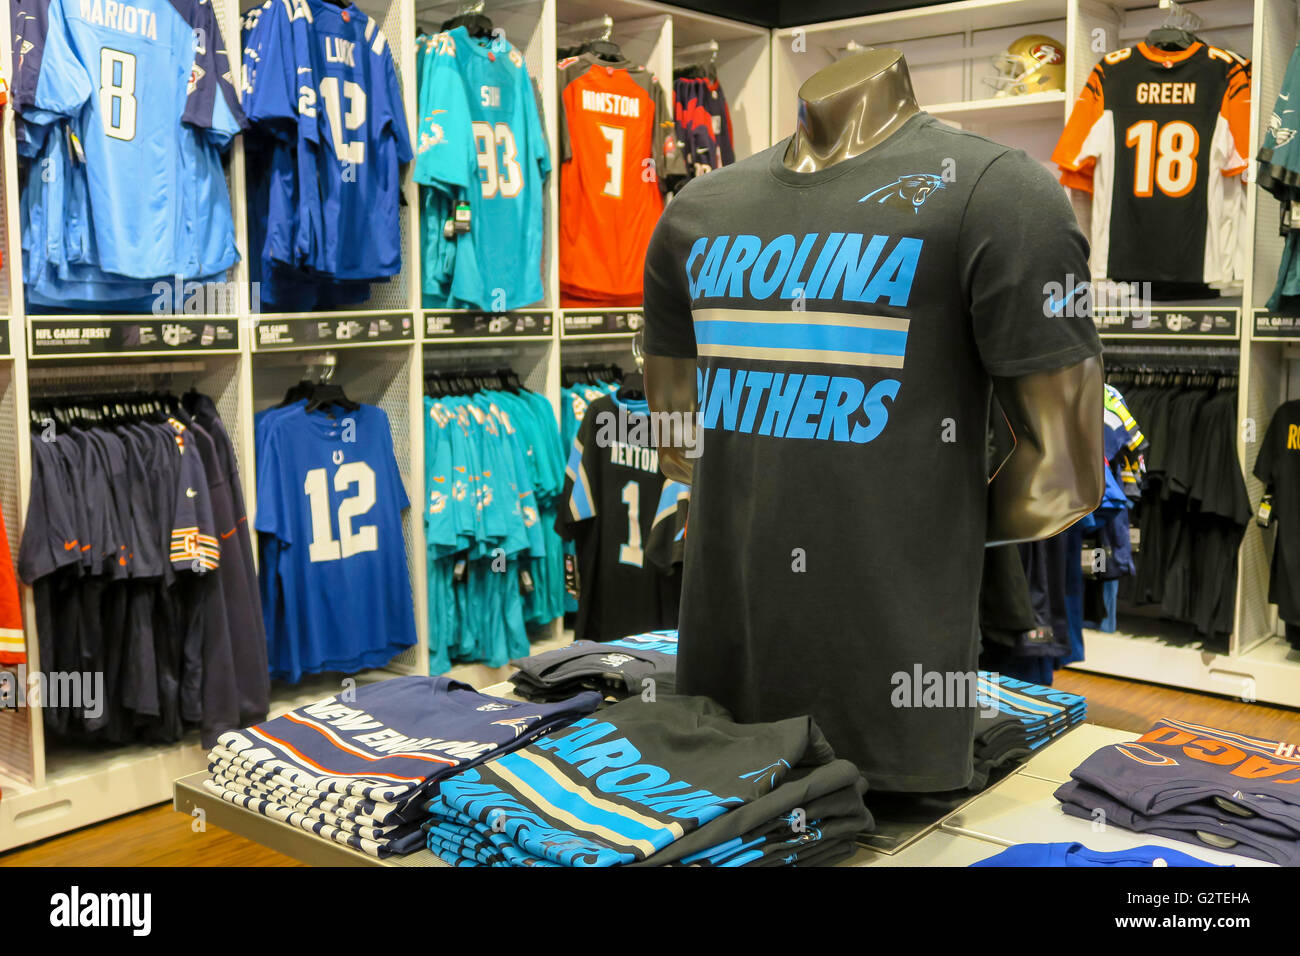 NFL Branded Clothing Display, Modell's Sporting Goods Store